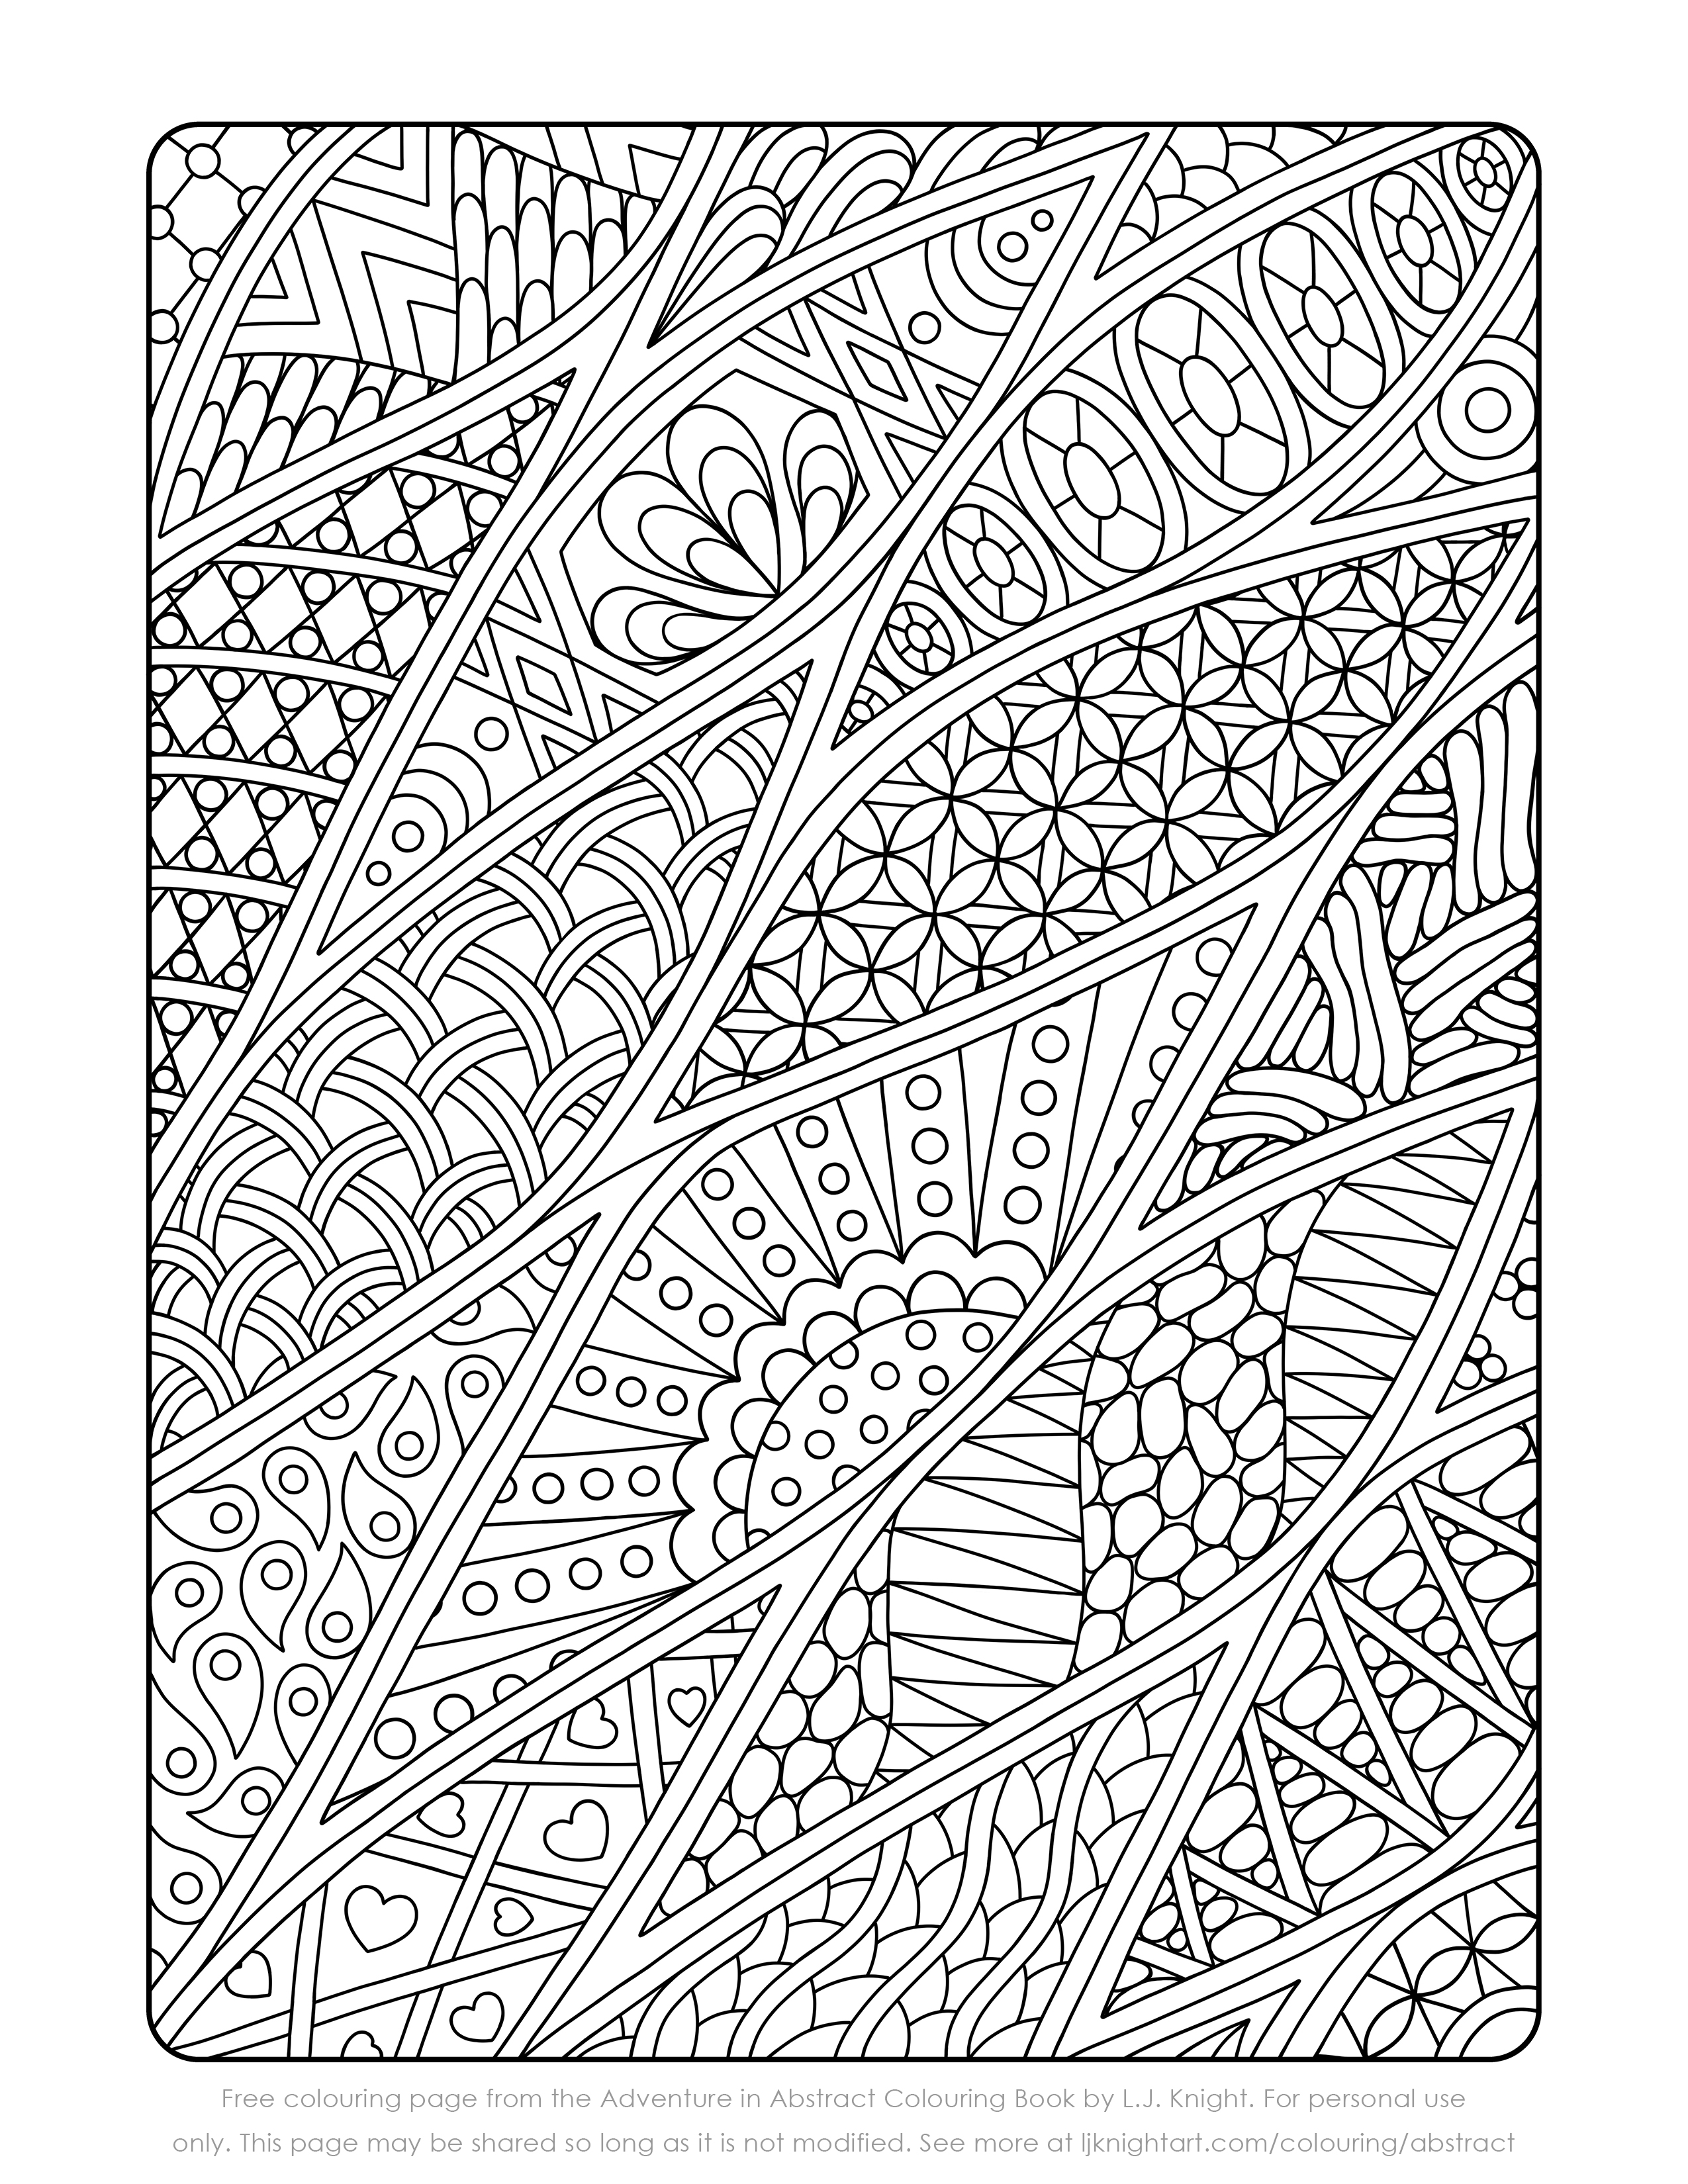 Easy Abstract Coloring Pages - Printable Coloring Pages for Adults